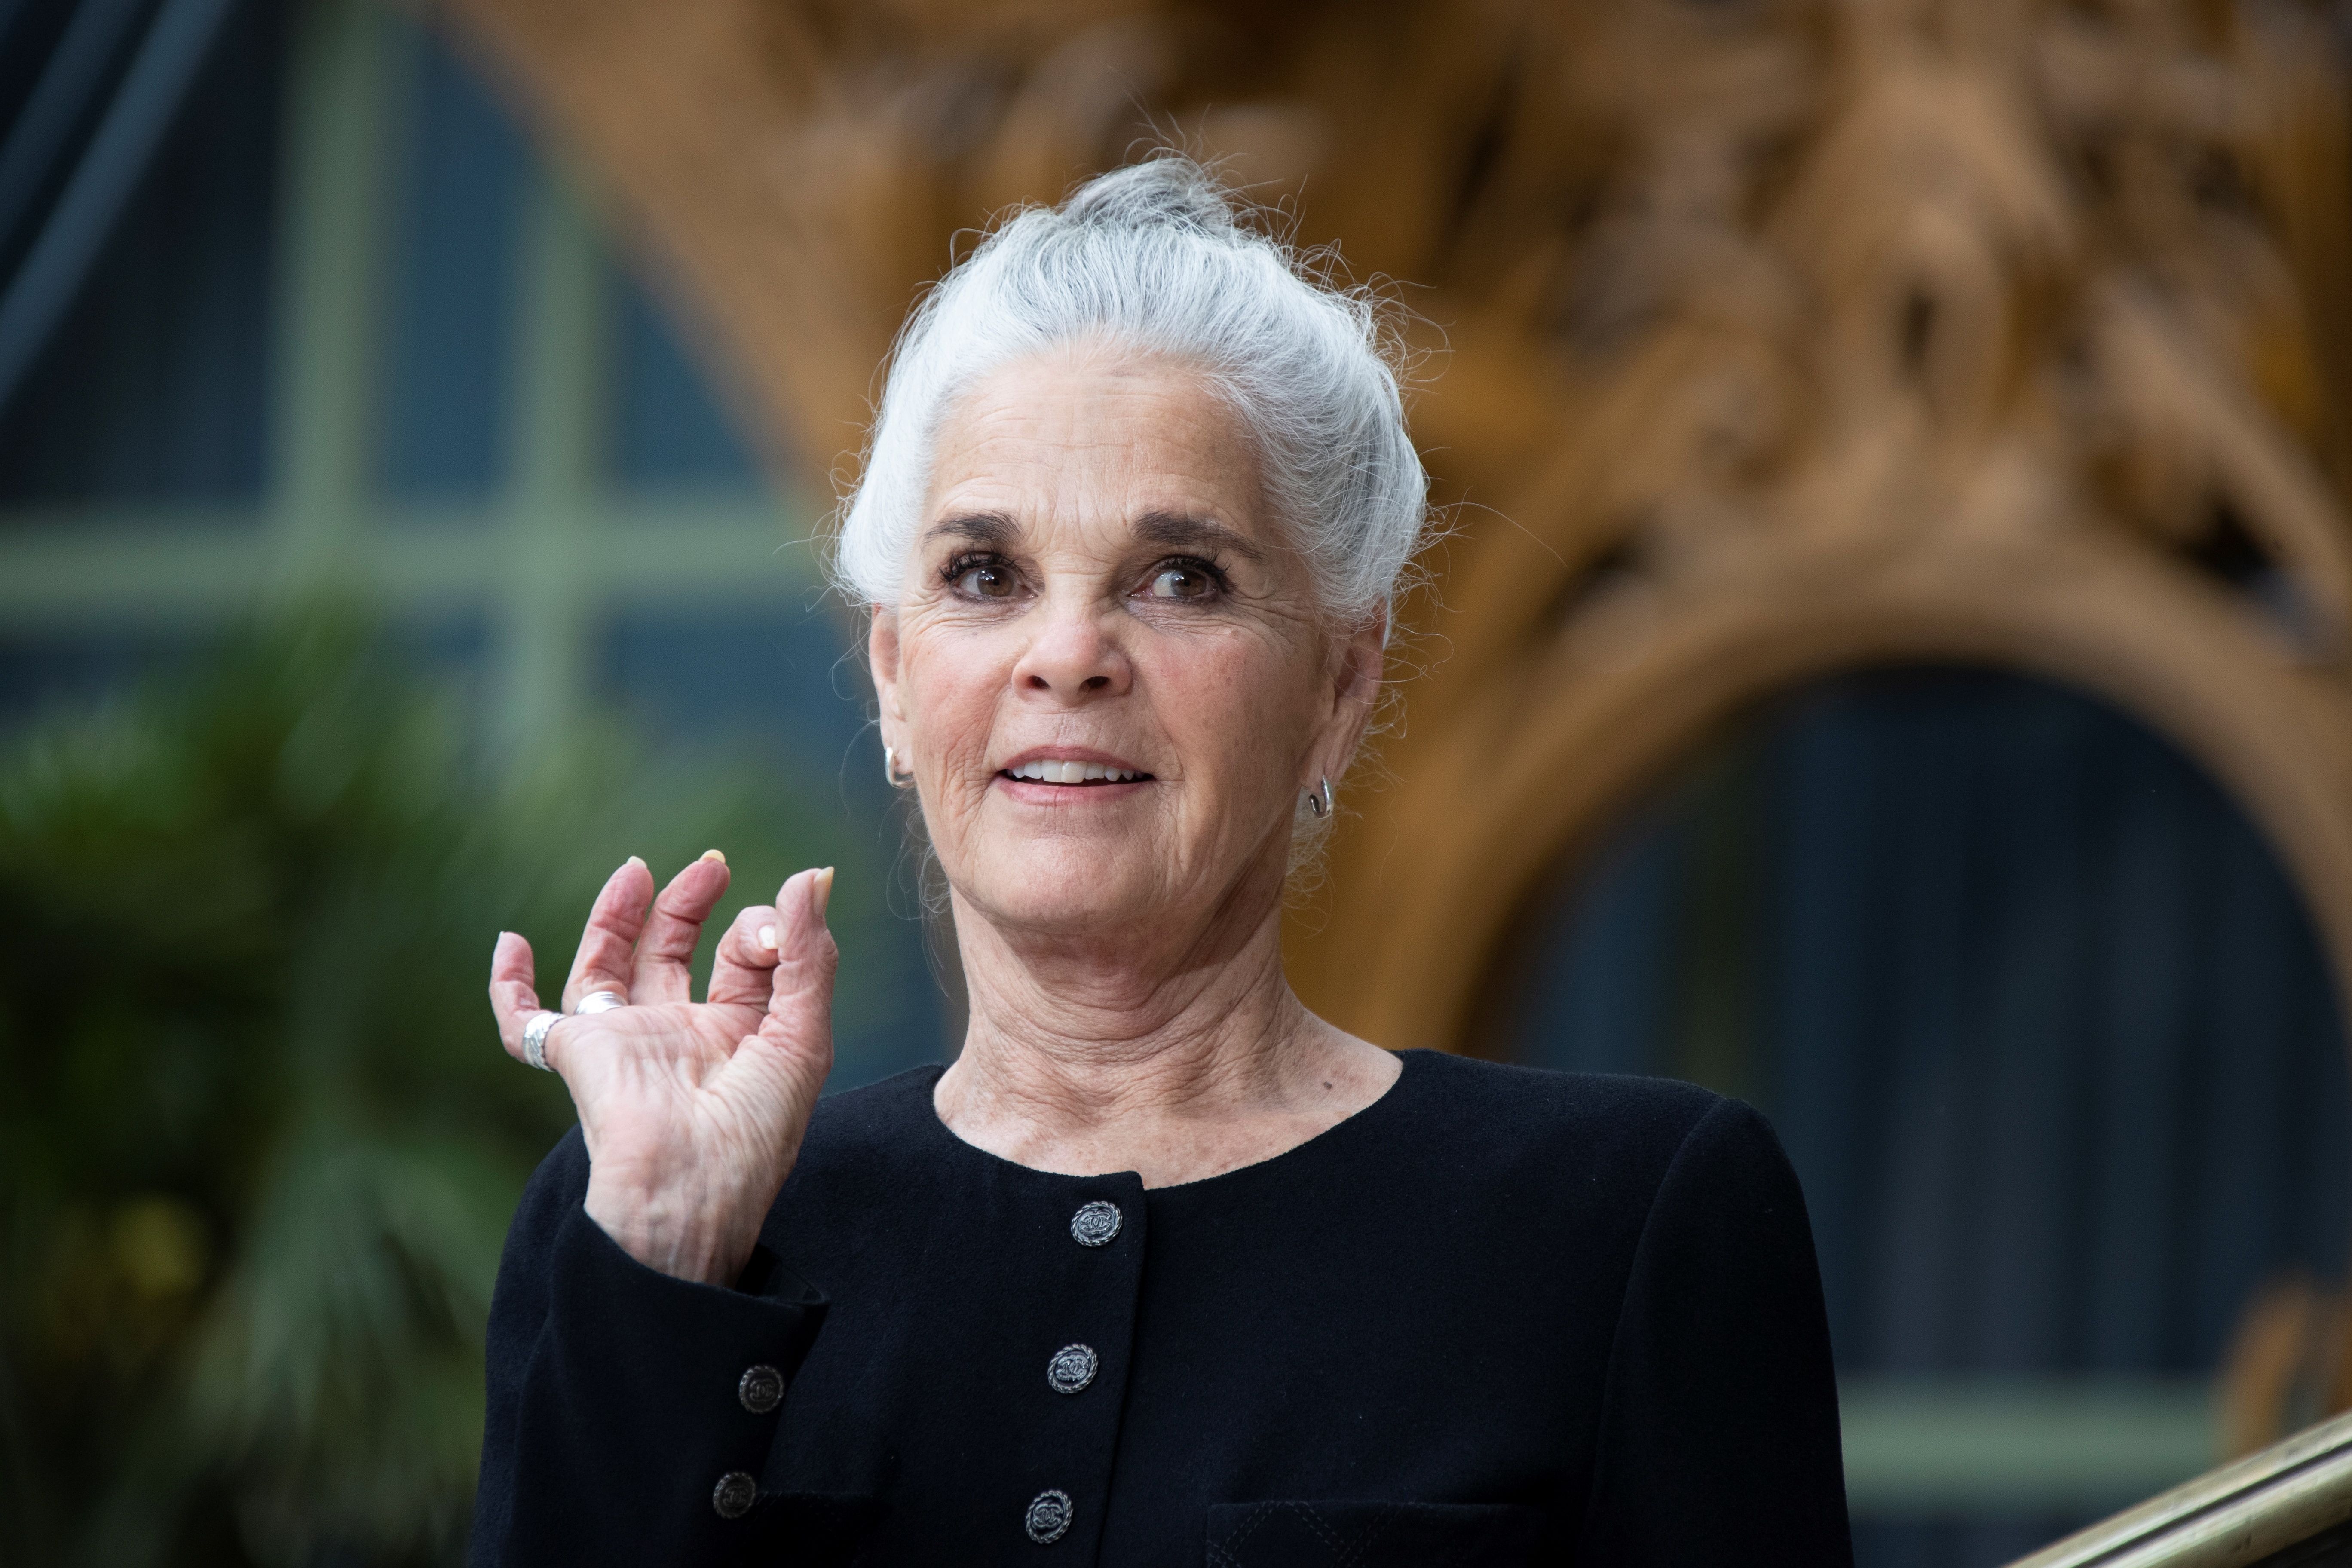 US actress Ali MacGraw poses during the photocall prior to the 2020 Chanel Croisiere (Cruise) fashion show at the Grand Palais in Paris on May 3, 2019.| Photo: Getty Images